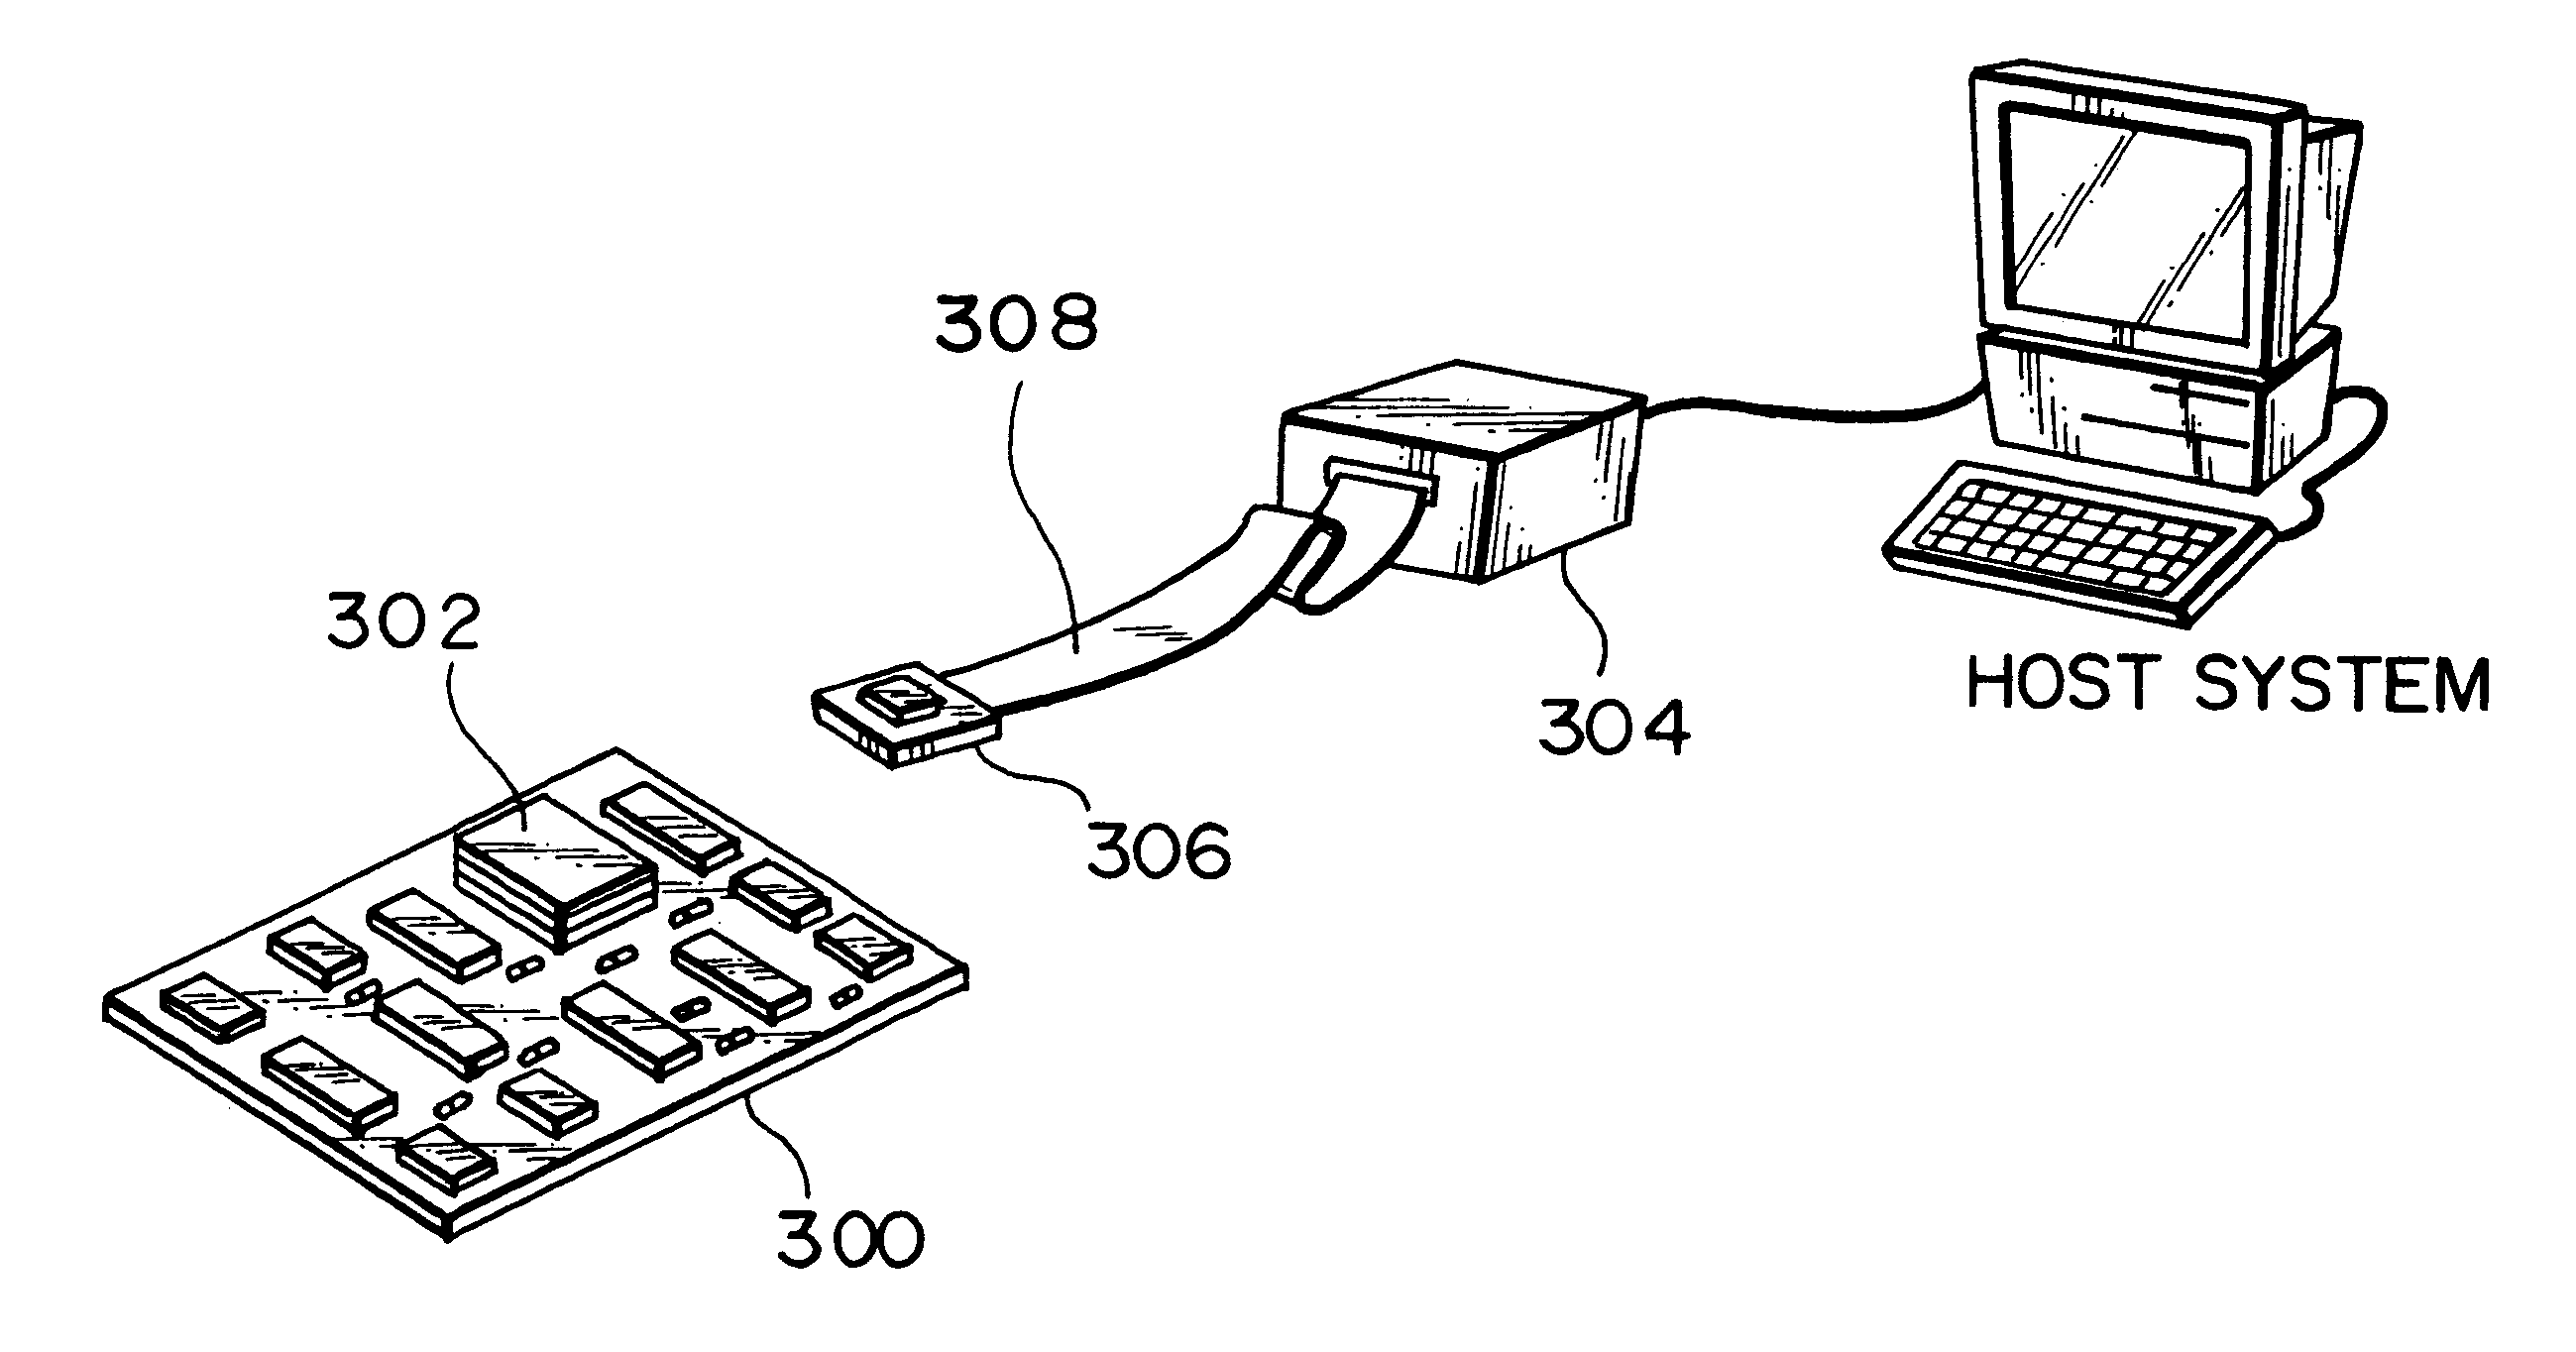 Microcomputer, electronic equipment, and debugging system